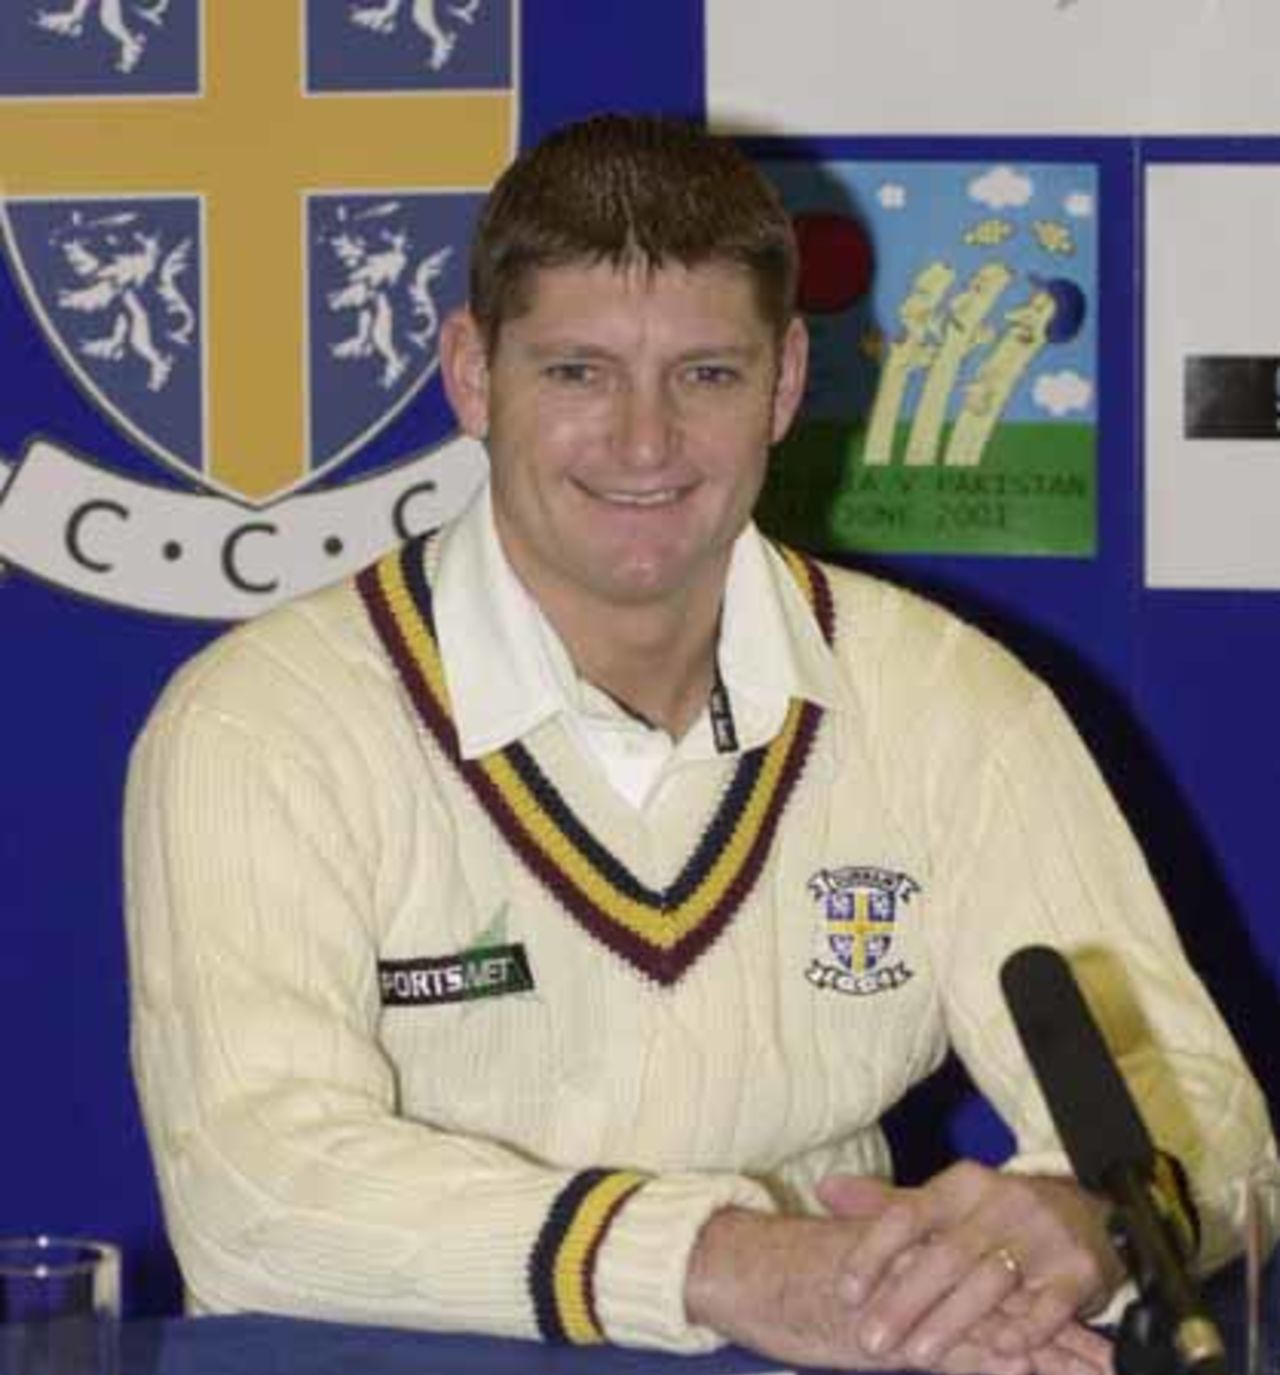 On his appointment as Durham coach